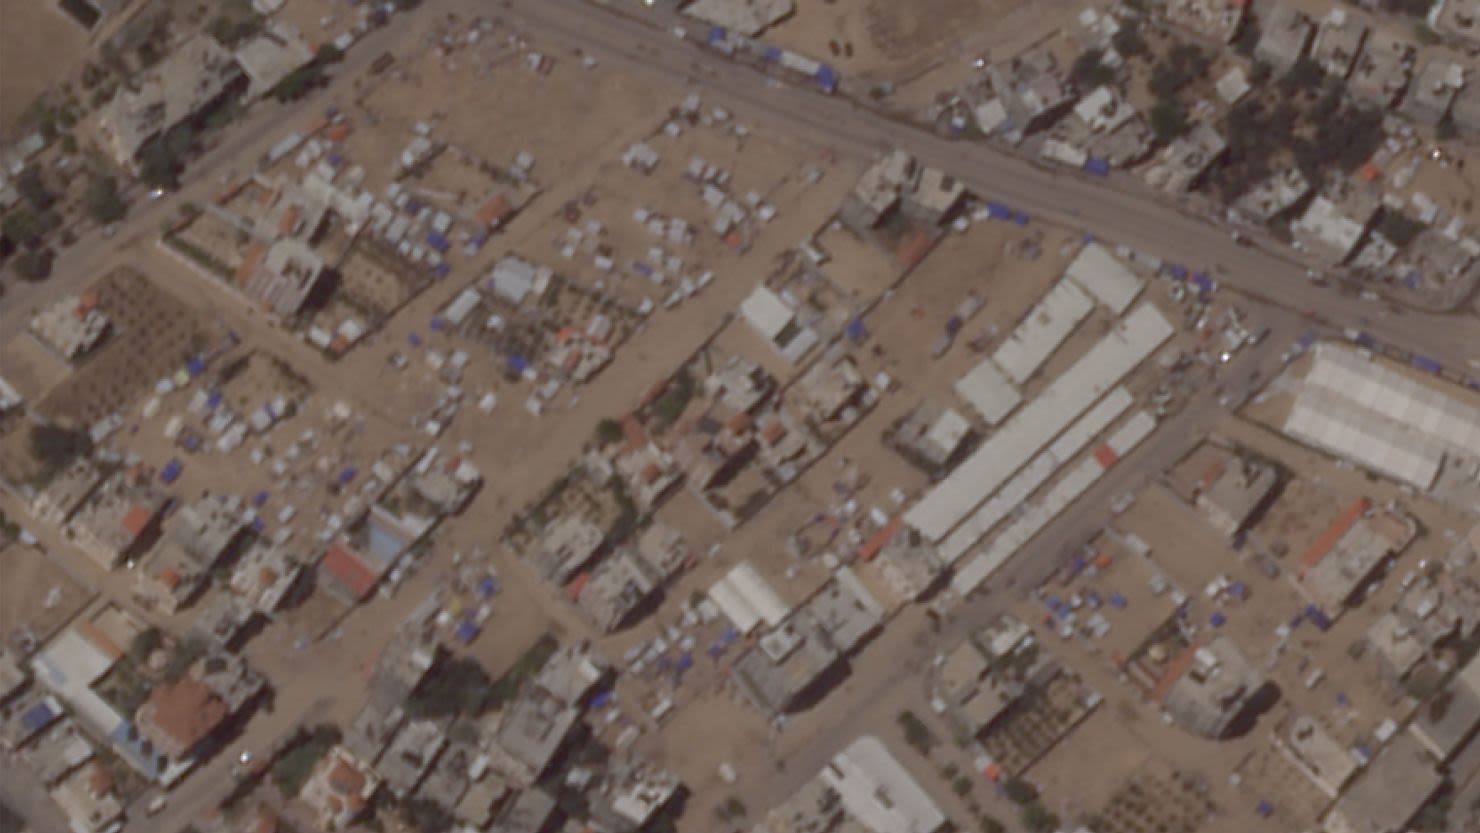 Satellite imagery shows Palestinians fleeing Rafah’s tent cities as threat of major attack looms | CNN